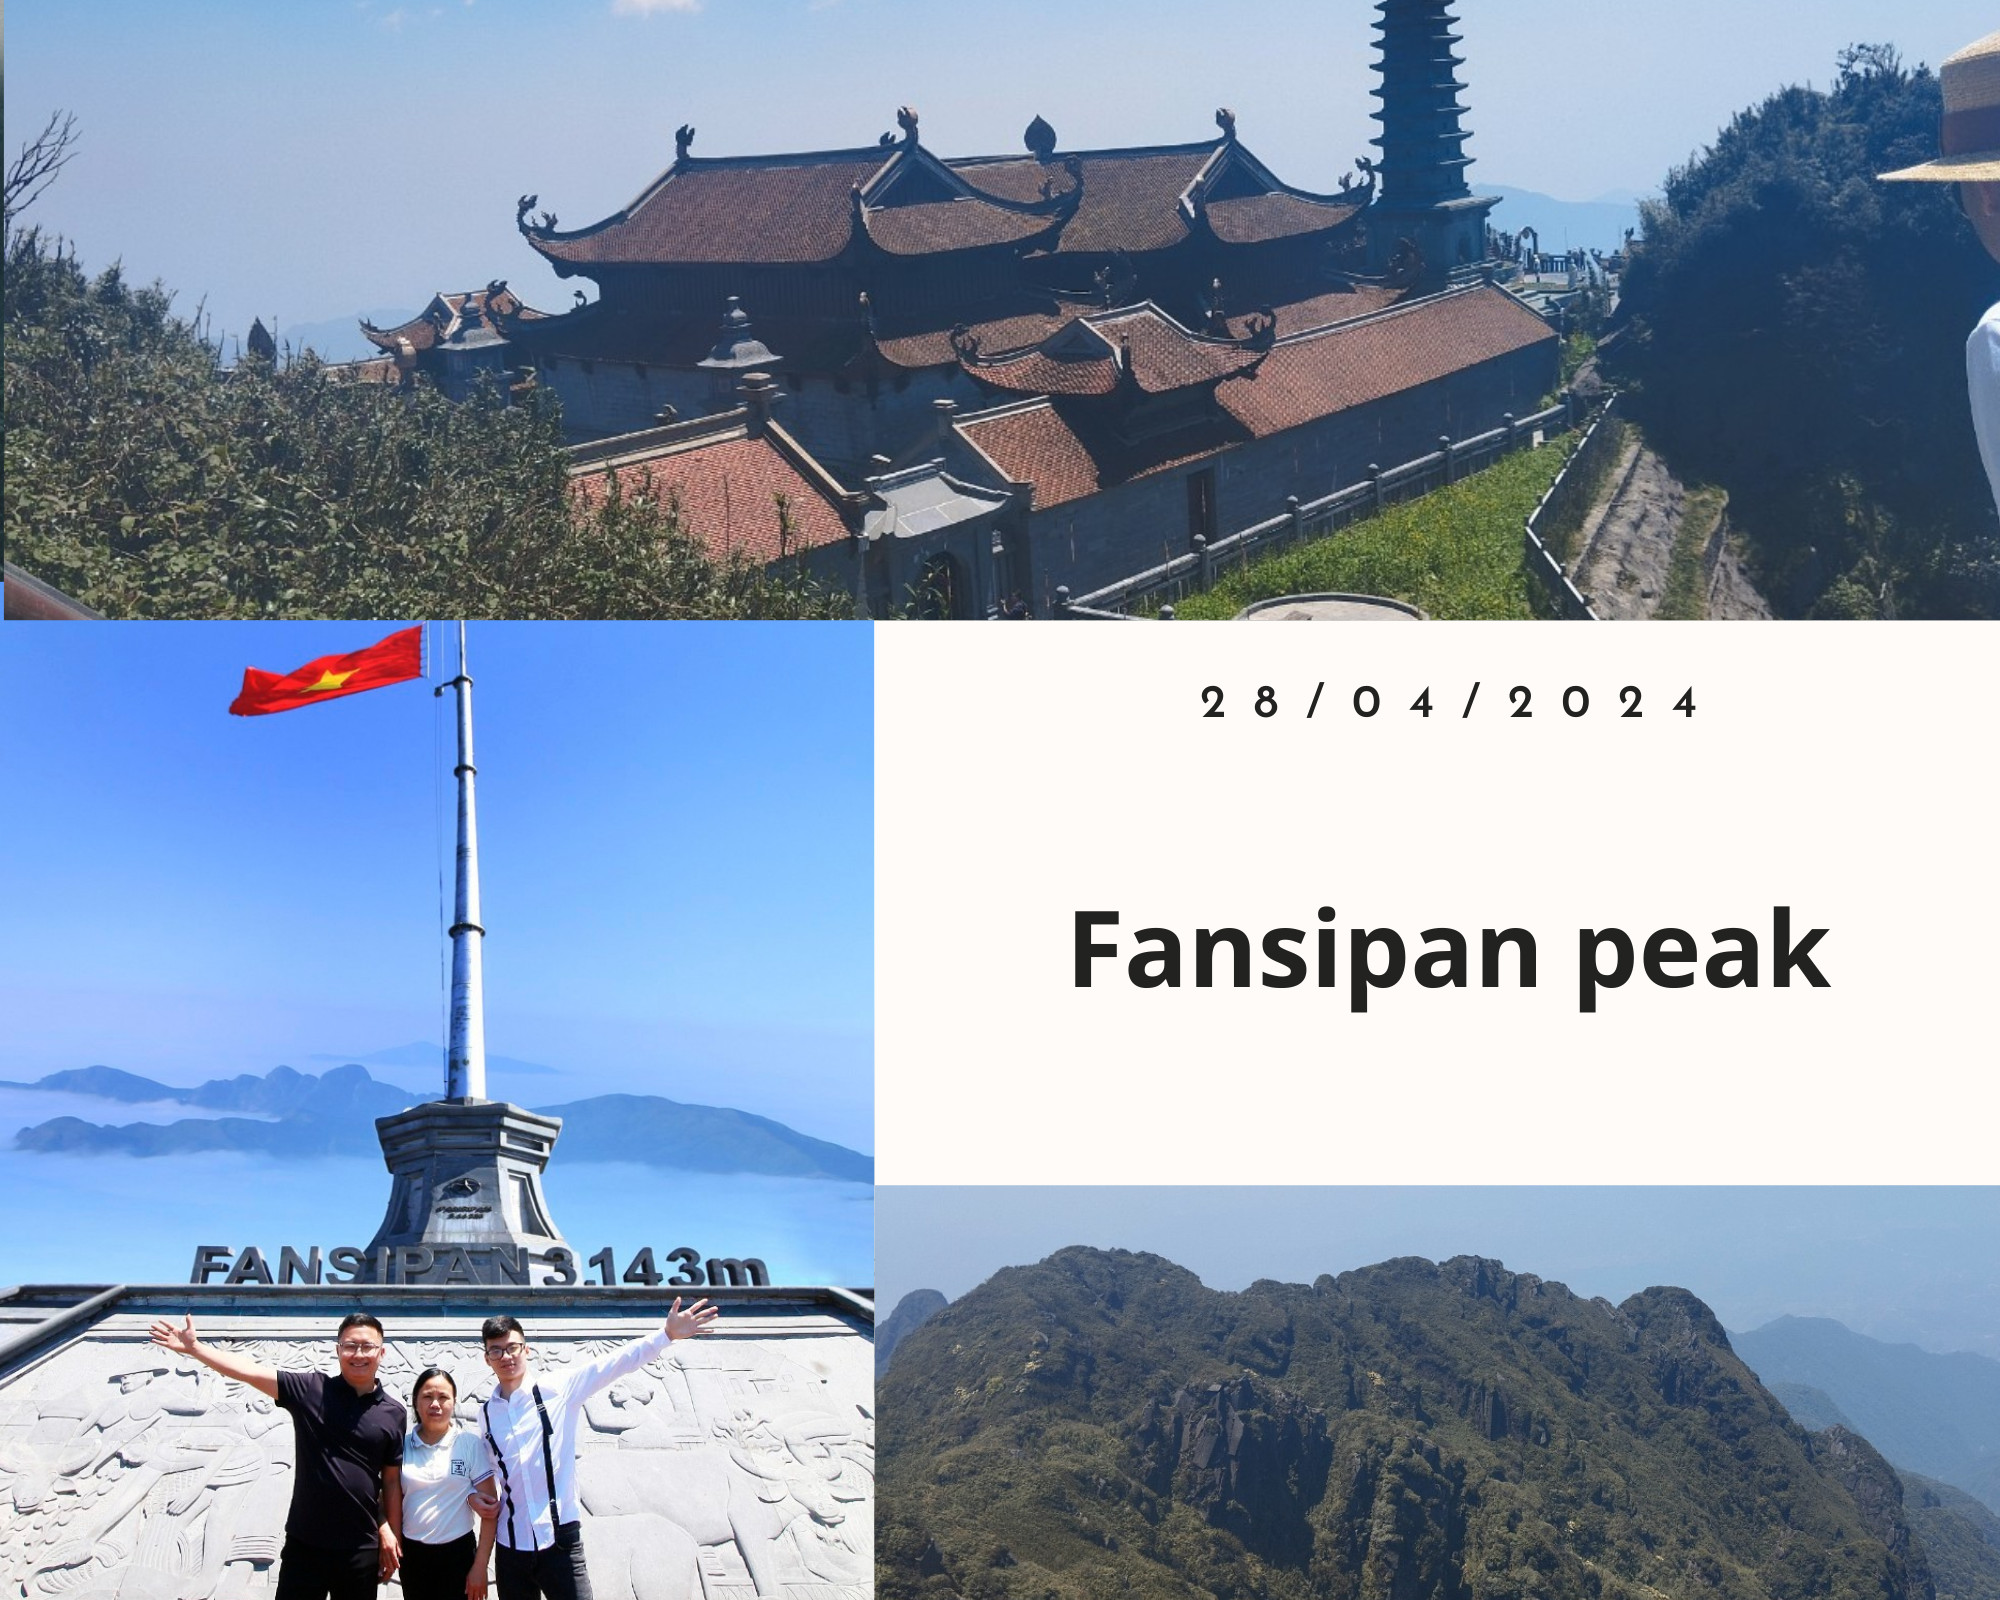 Take your mother to the top of Fansipan